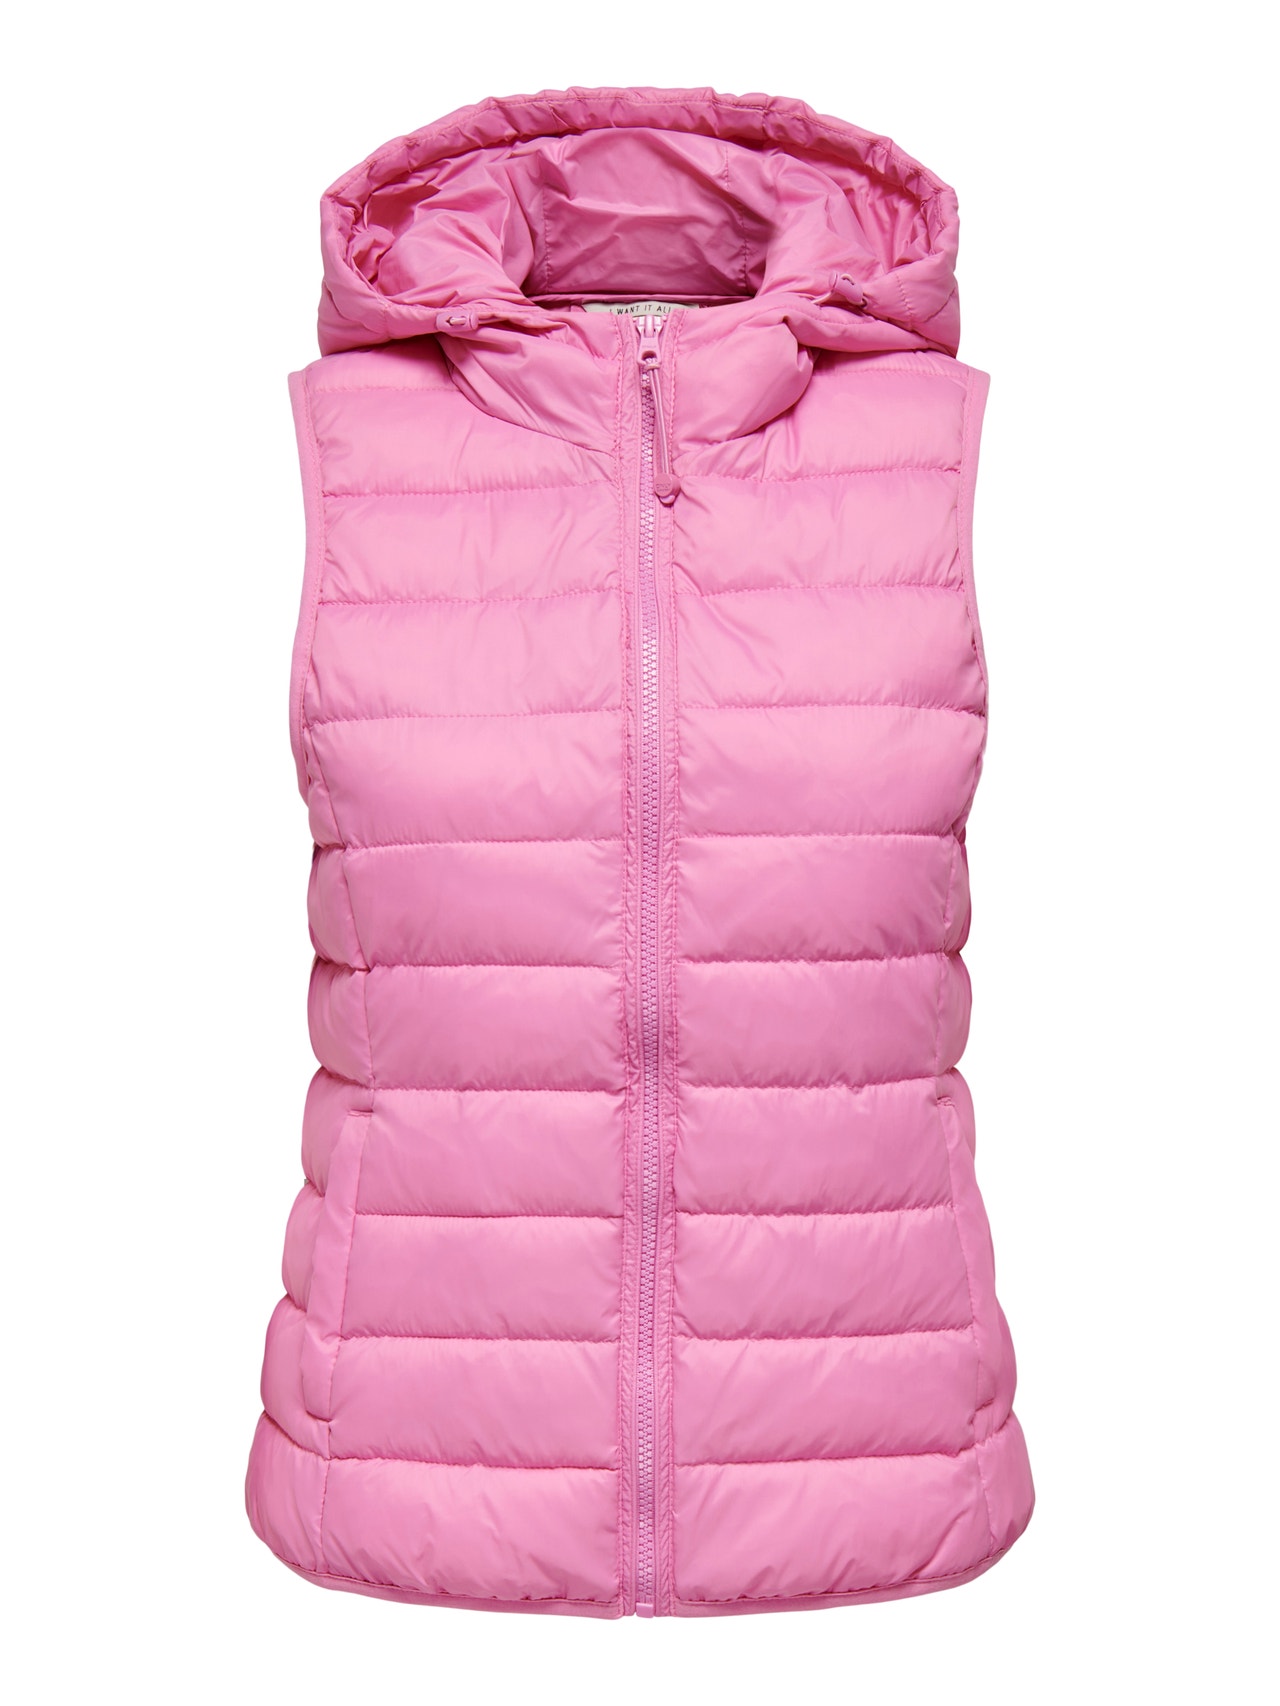 ONLY Quilted Waistcoat -Fuchsia Pink - 15205760